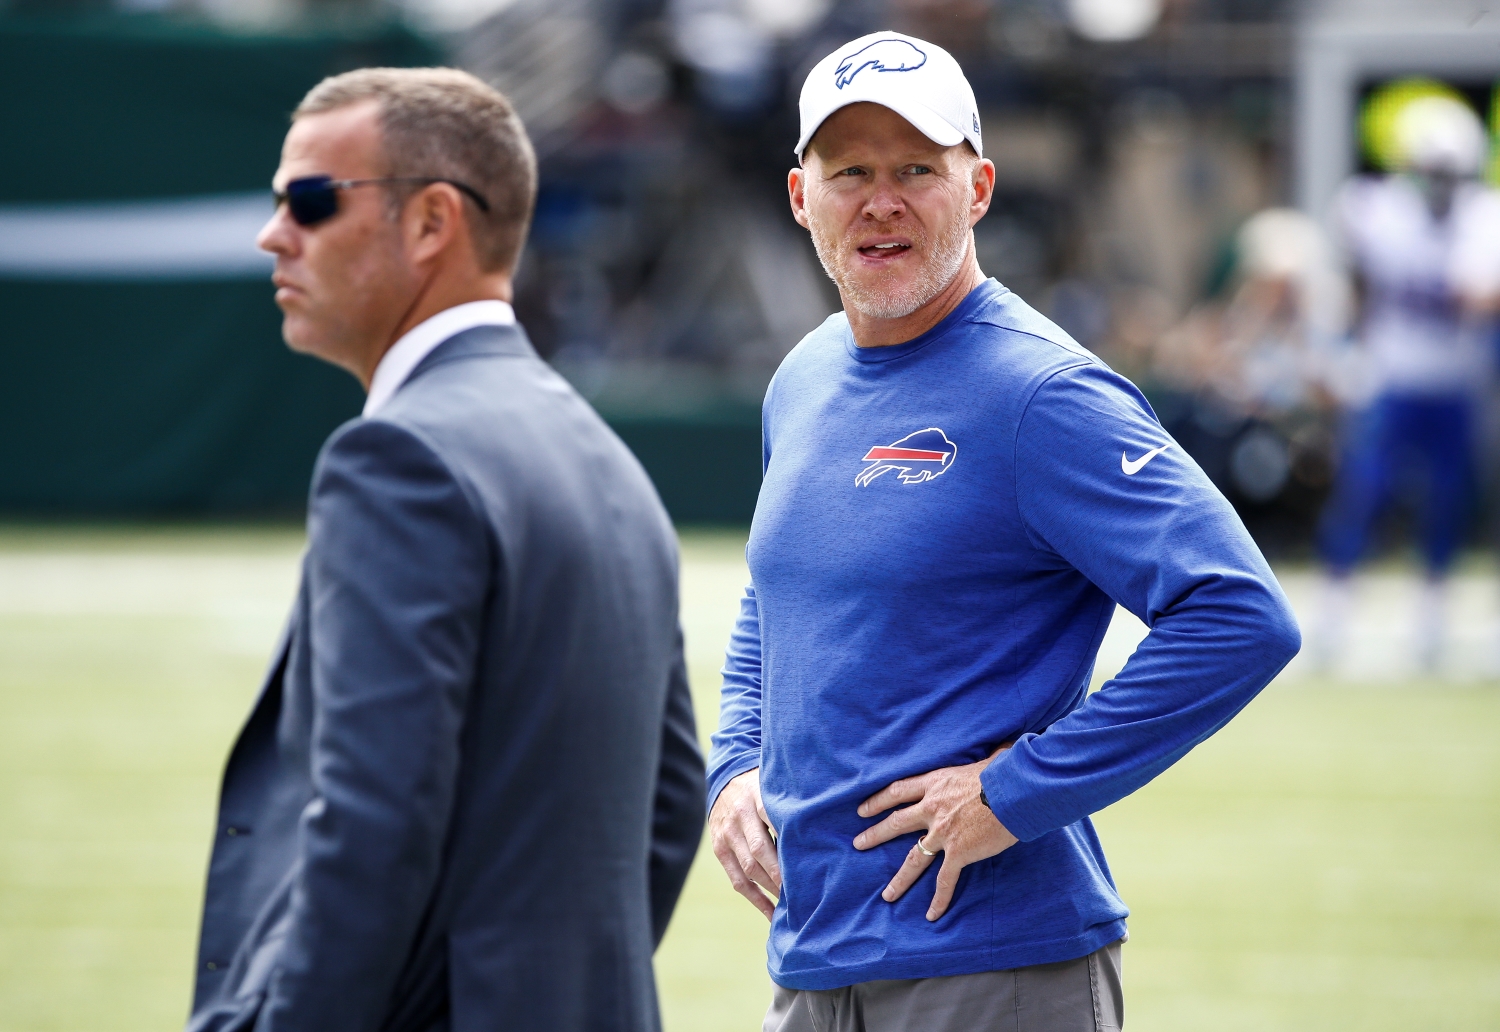 Head coach Sean McDermott of the Buffalo Bills stands with general manager Brandon Beane on the field before a game against the New York Jets during the 2019 NFL season.